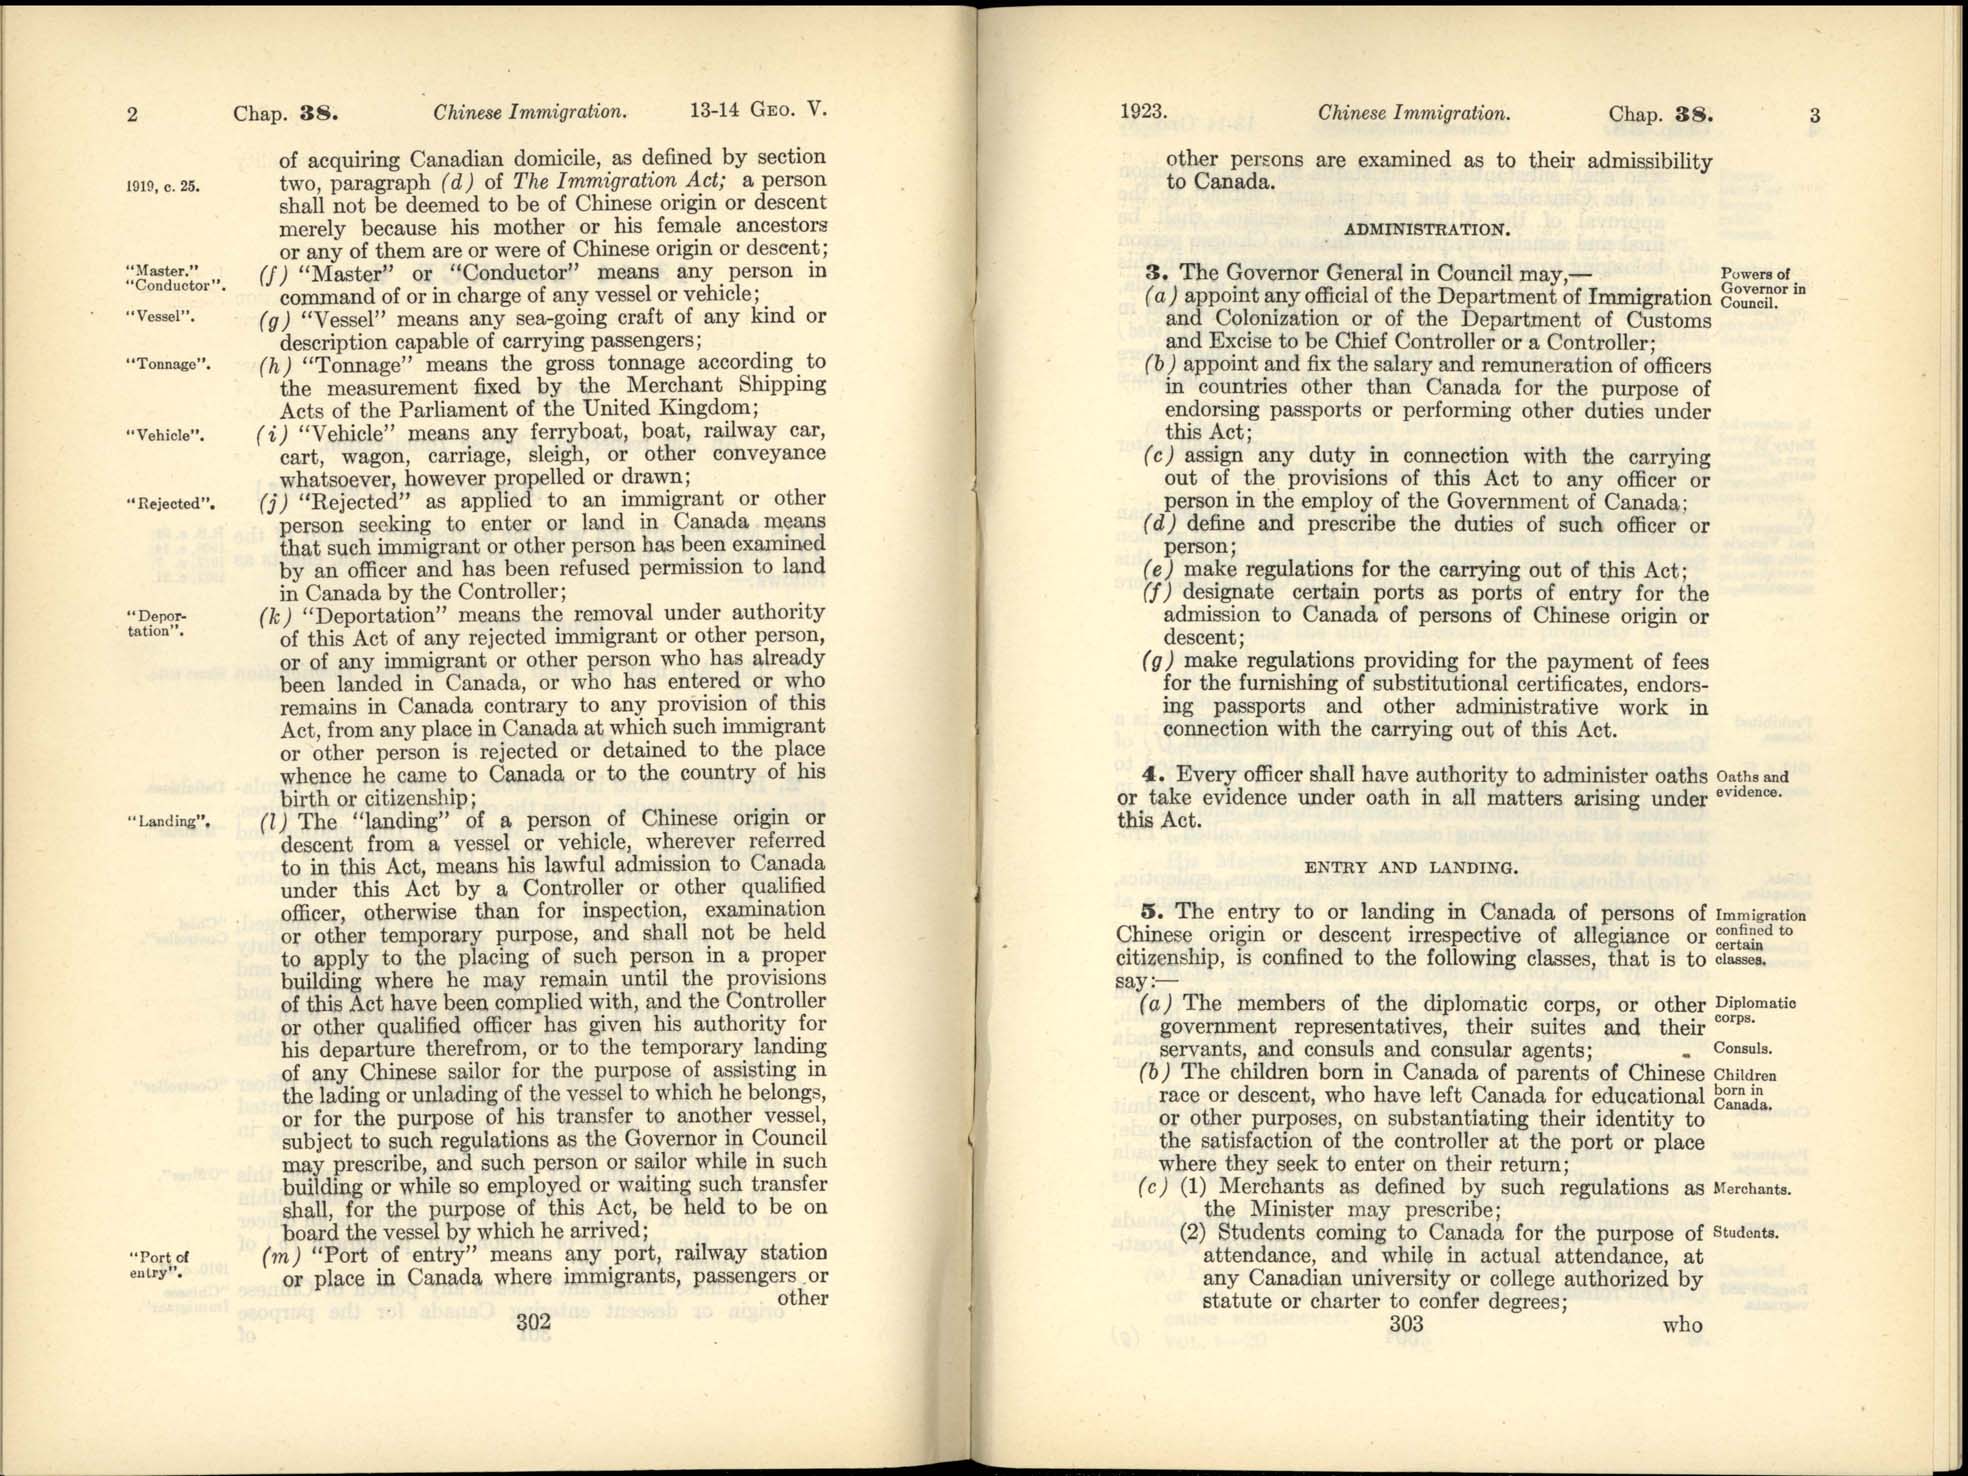 Page 302, 303 Chinese Immigration Act, 1923